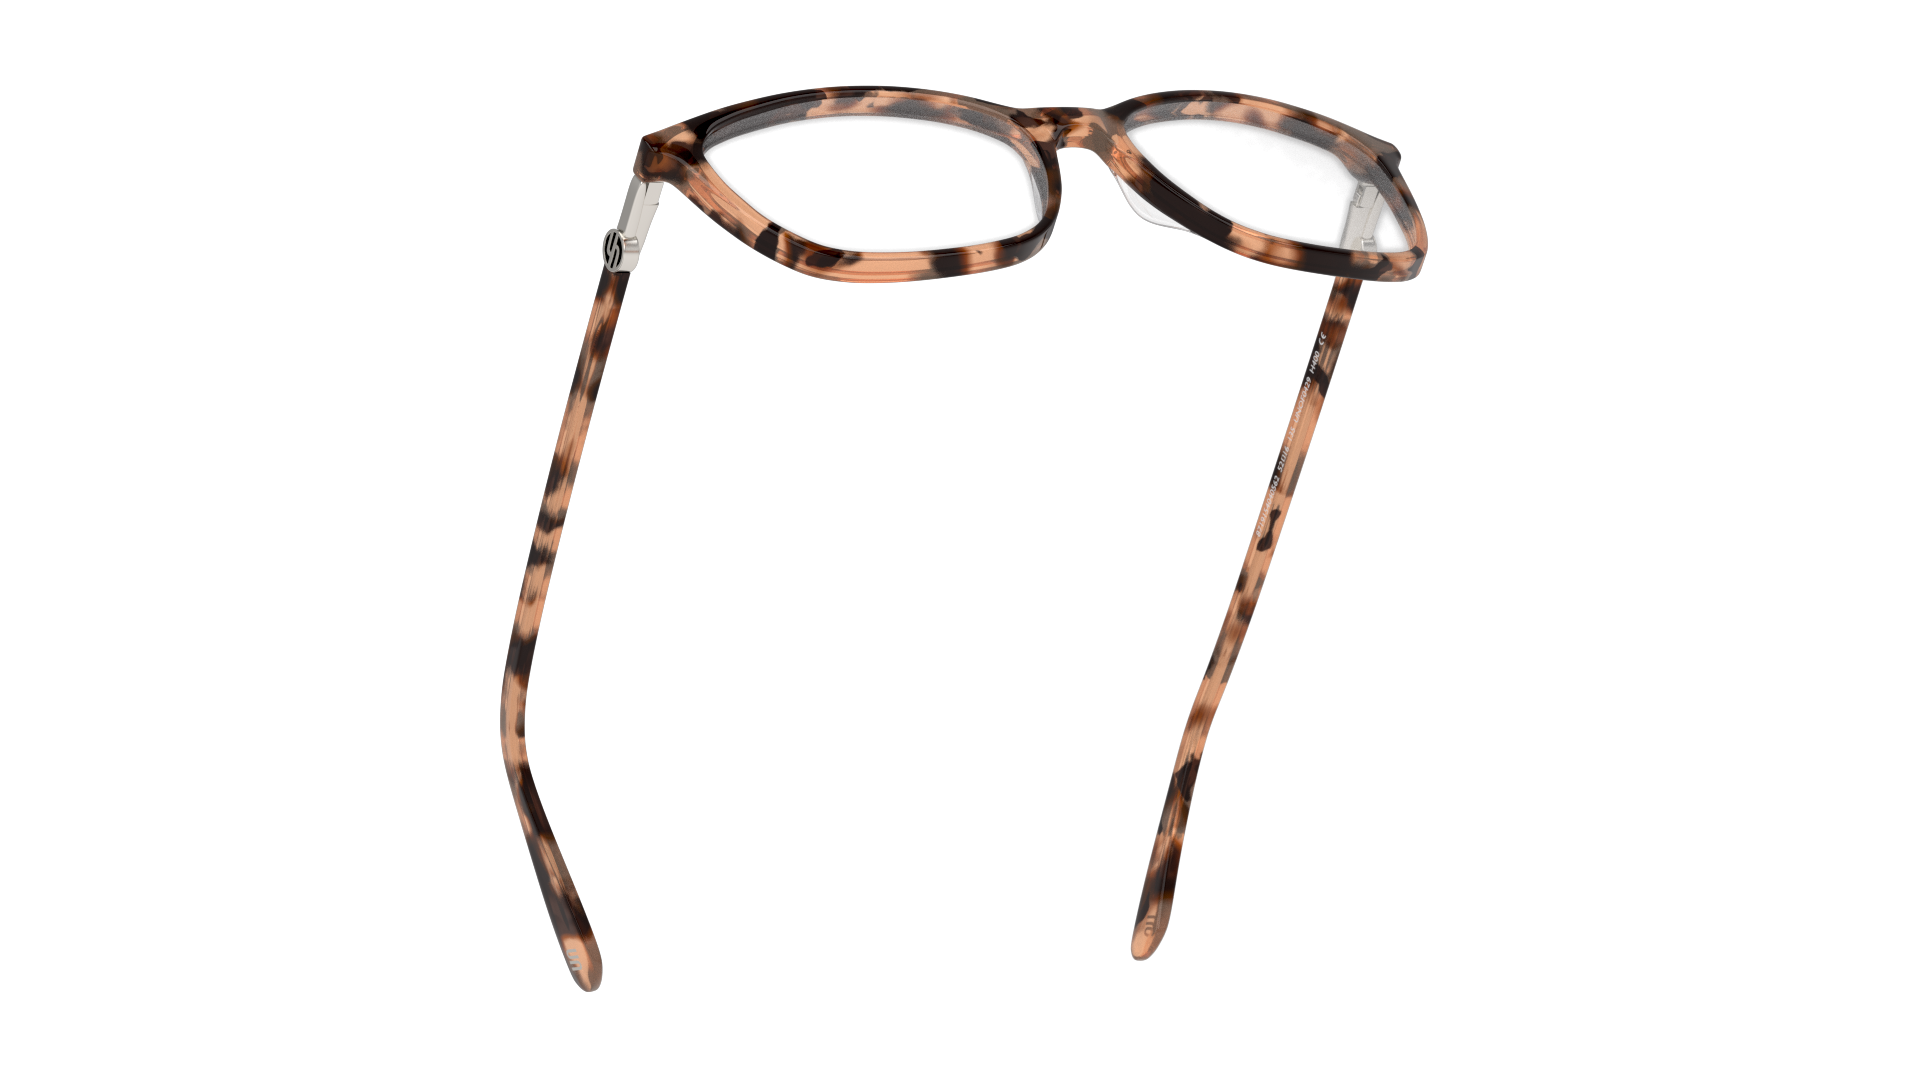 Bottom_Up Unofficial UNOF0429 (HH00) Glasses Transparent / Tortoise Shell